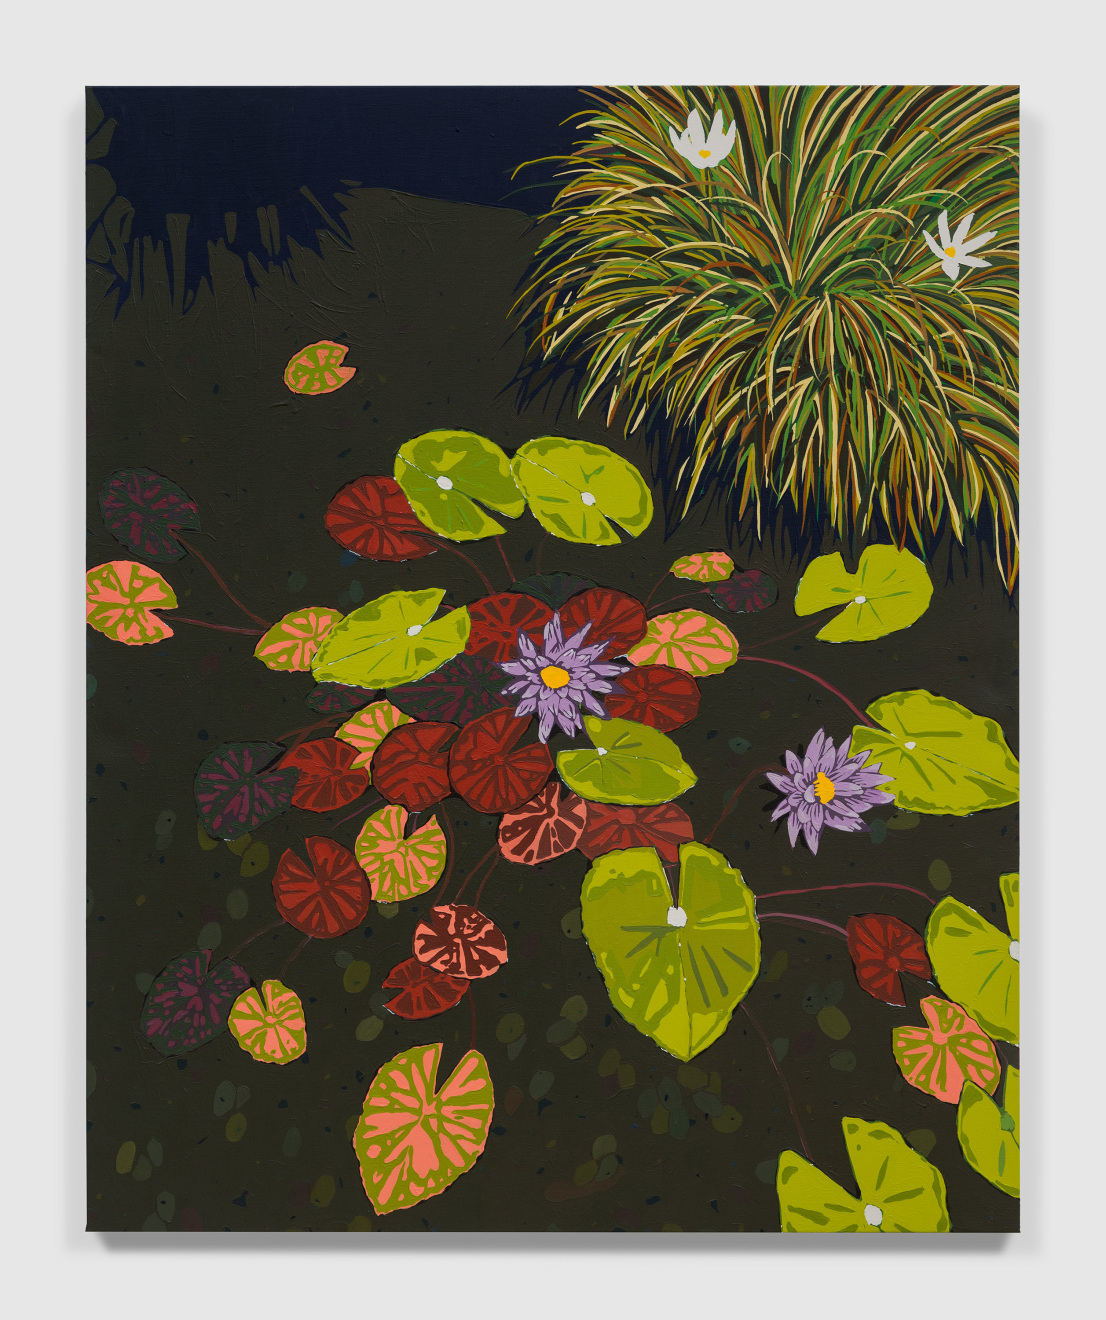 Hilary Pecis, Water Lilies, 2022